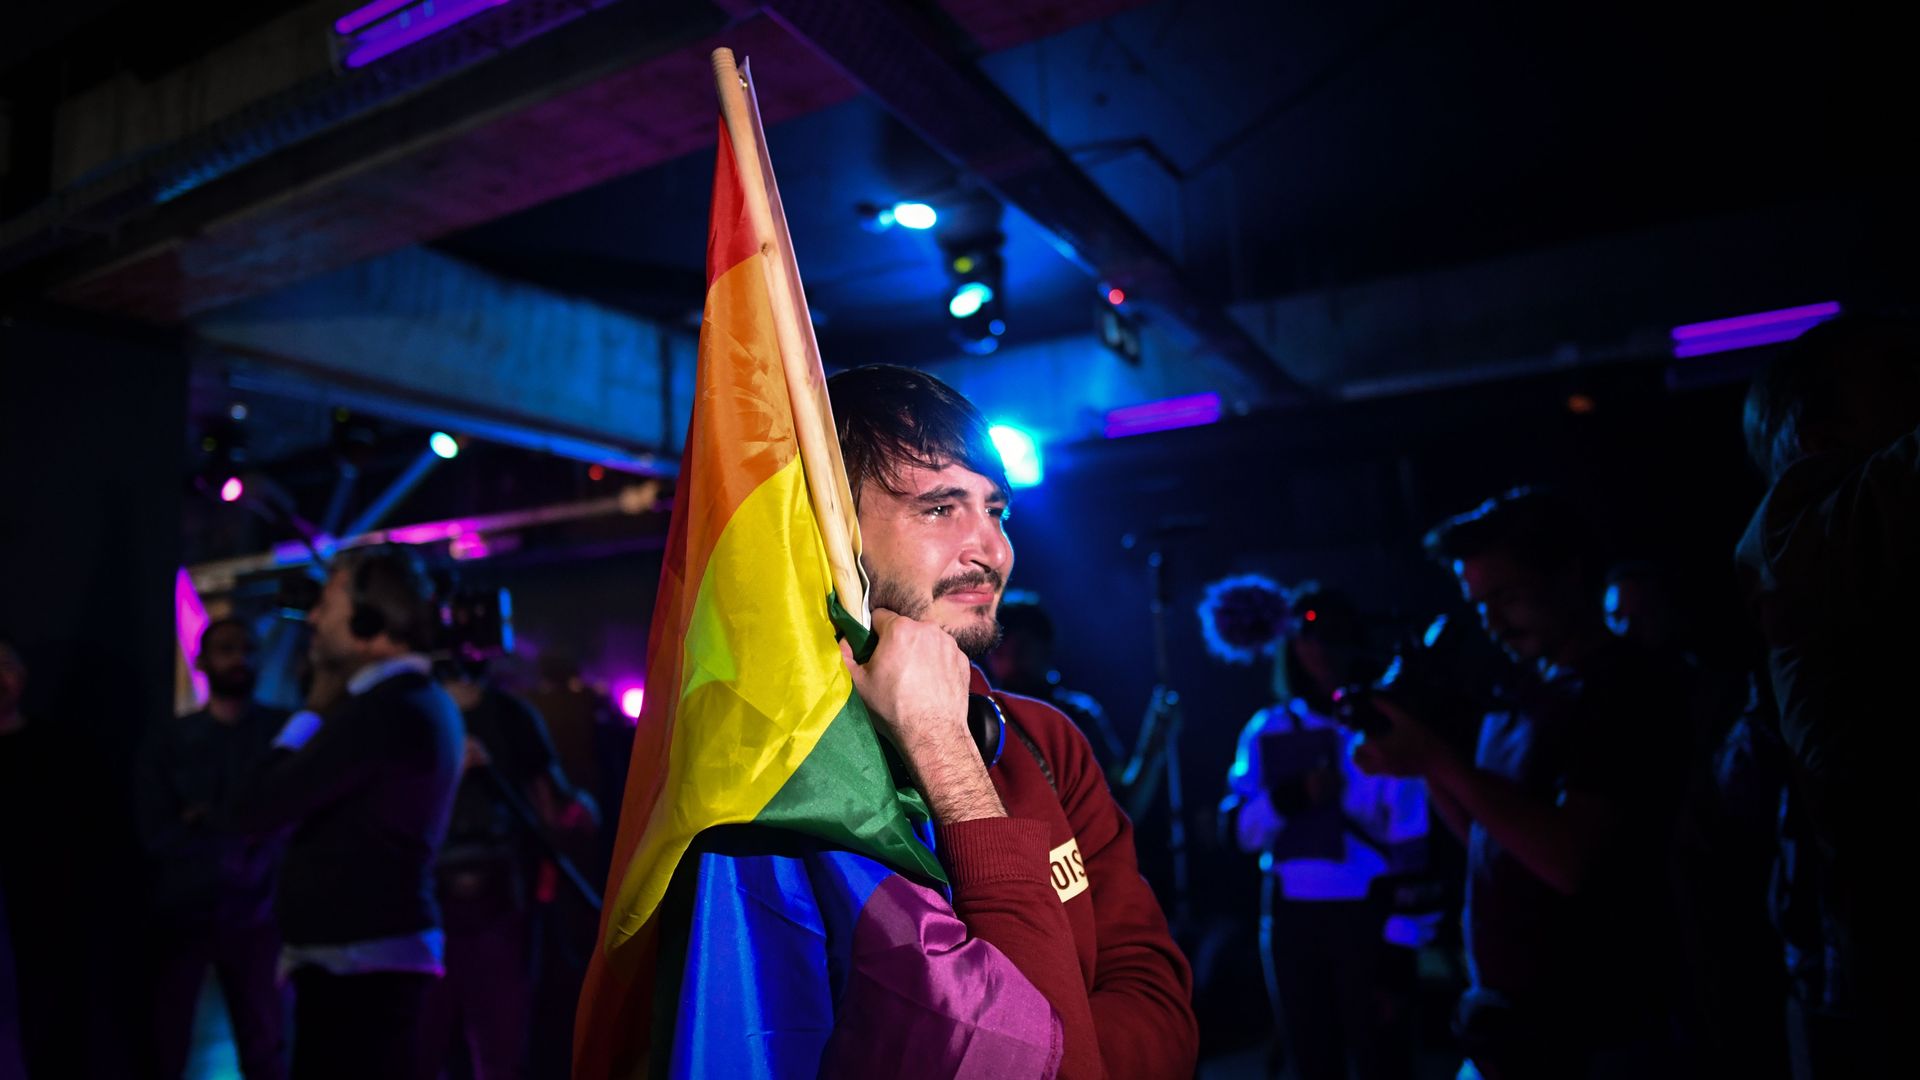 A member of the LGBT community gets emotional before results of referendum to stipulate that marriage is between a man and a woman. Photo: Daniel Mihailescu/ AFP/Getty Images